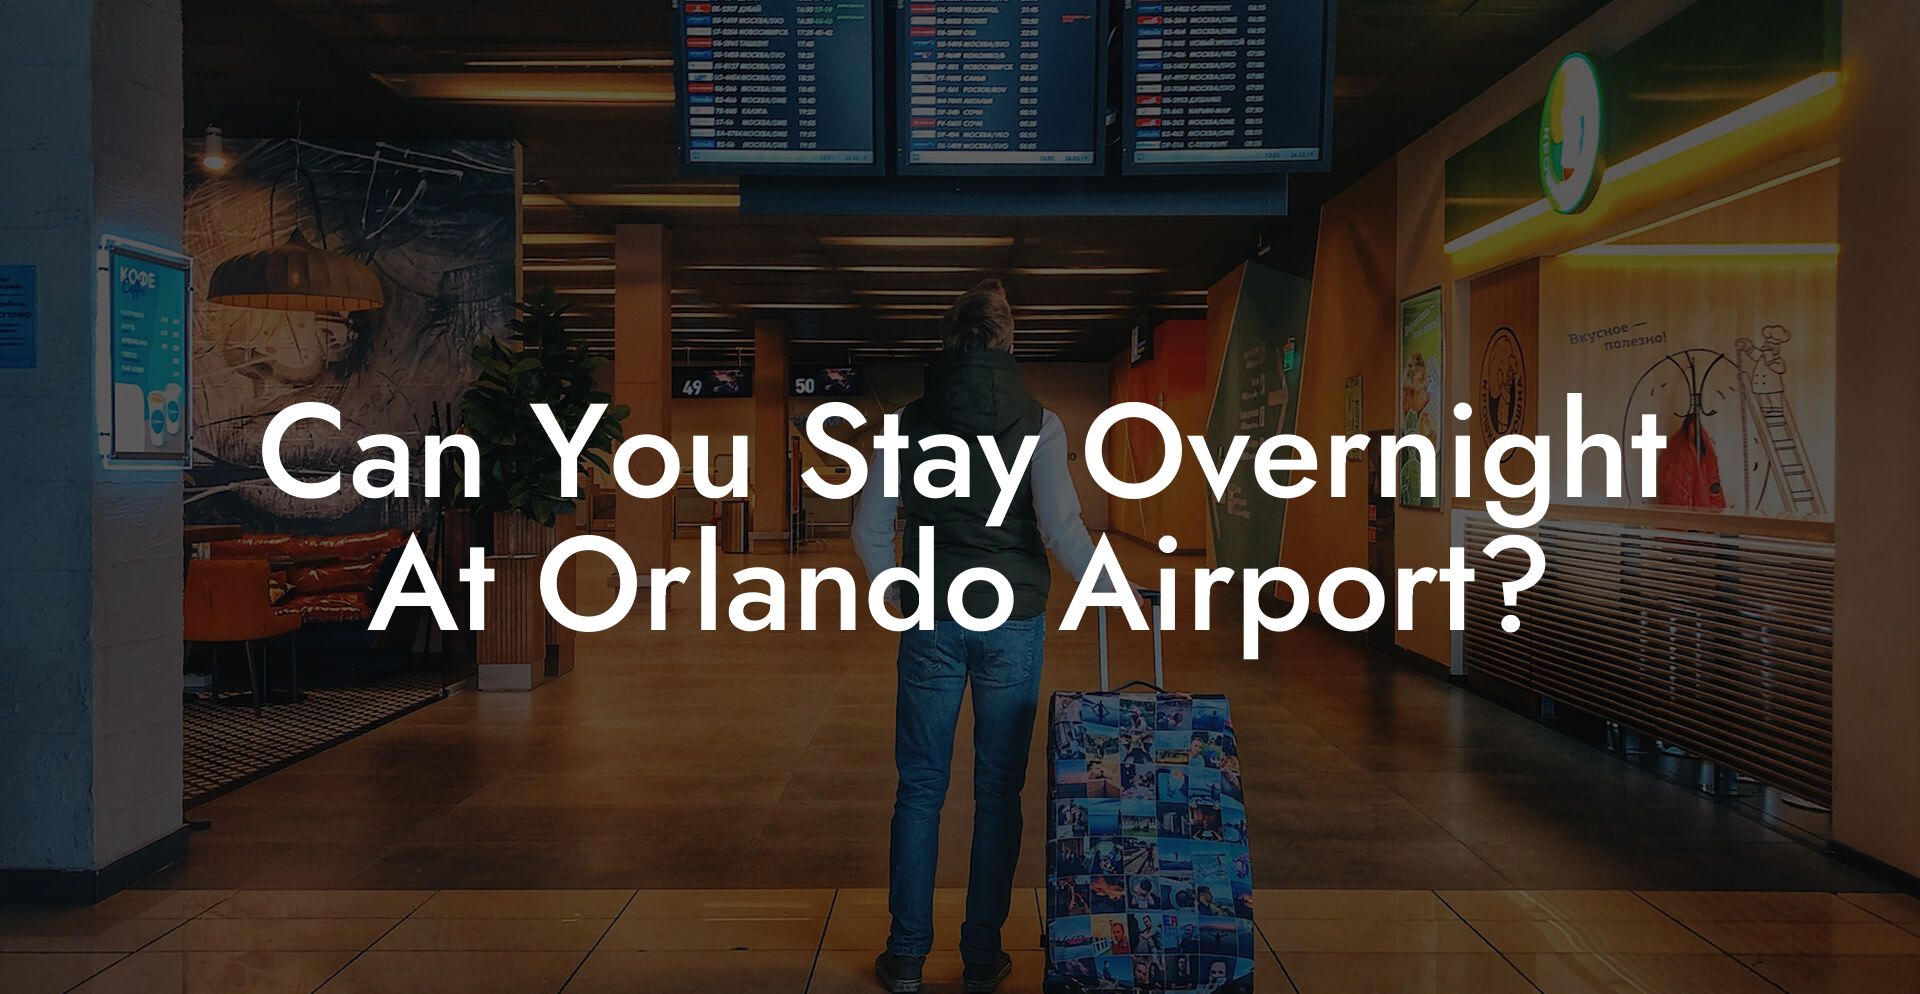 Can You Stay Overnight At Orlando Airport?